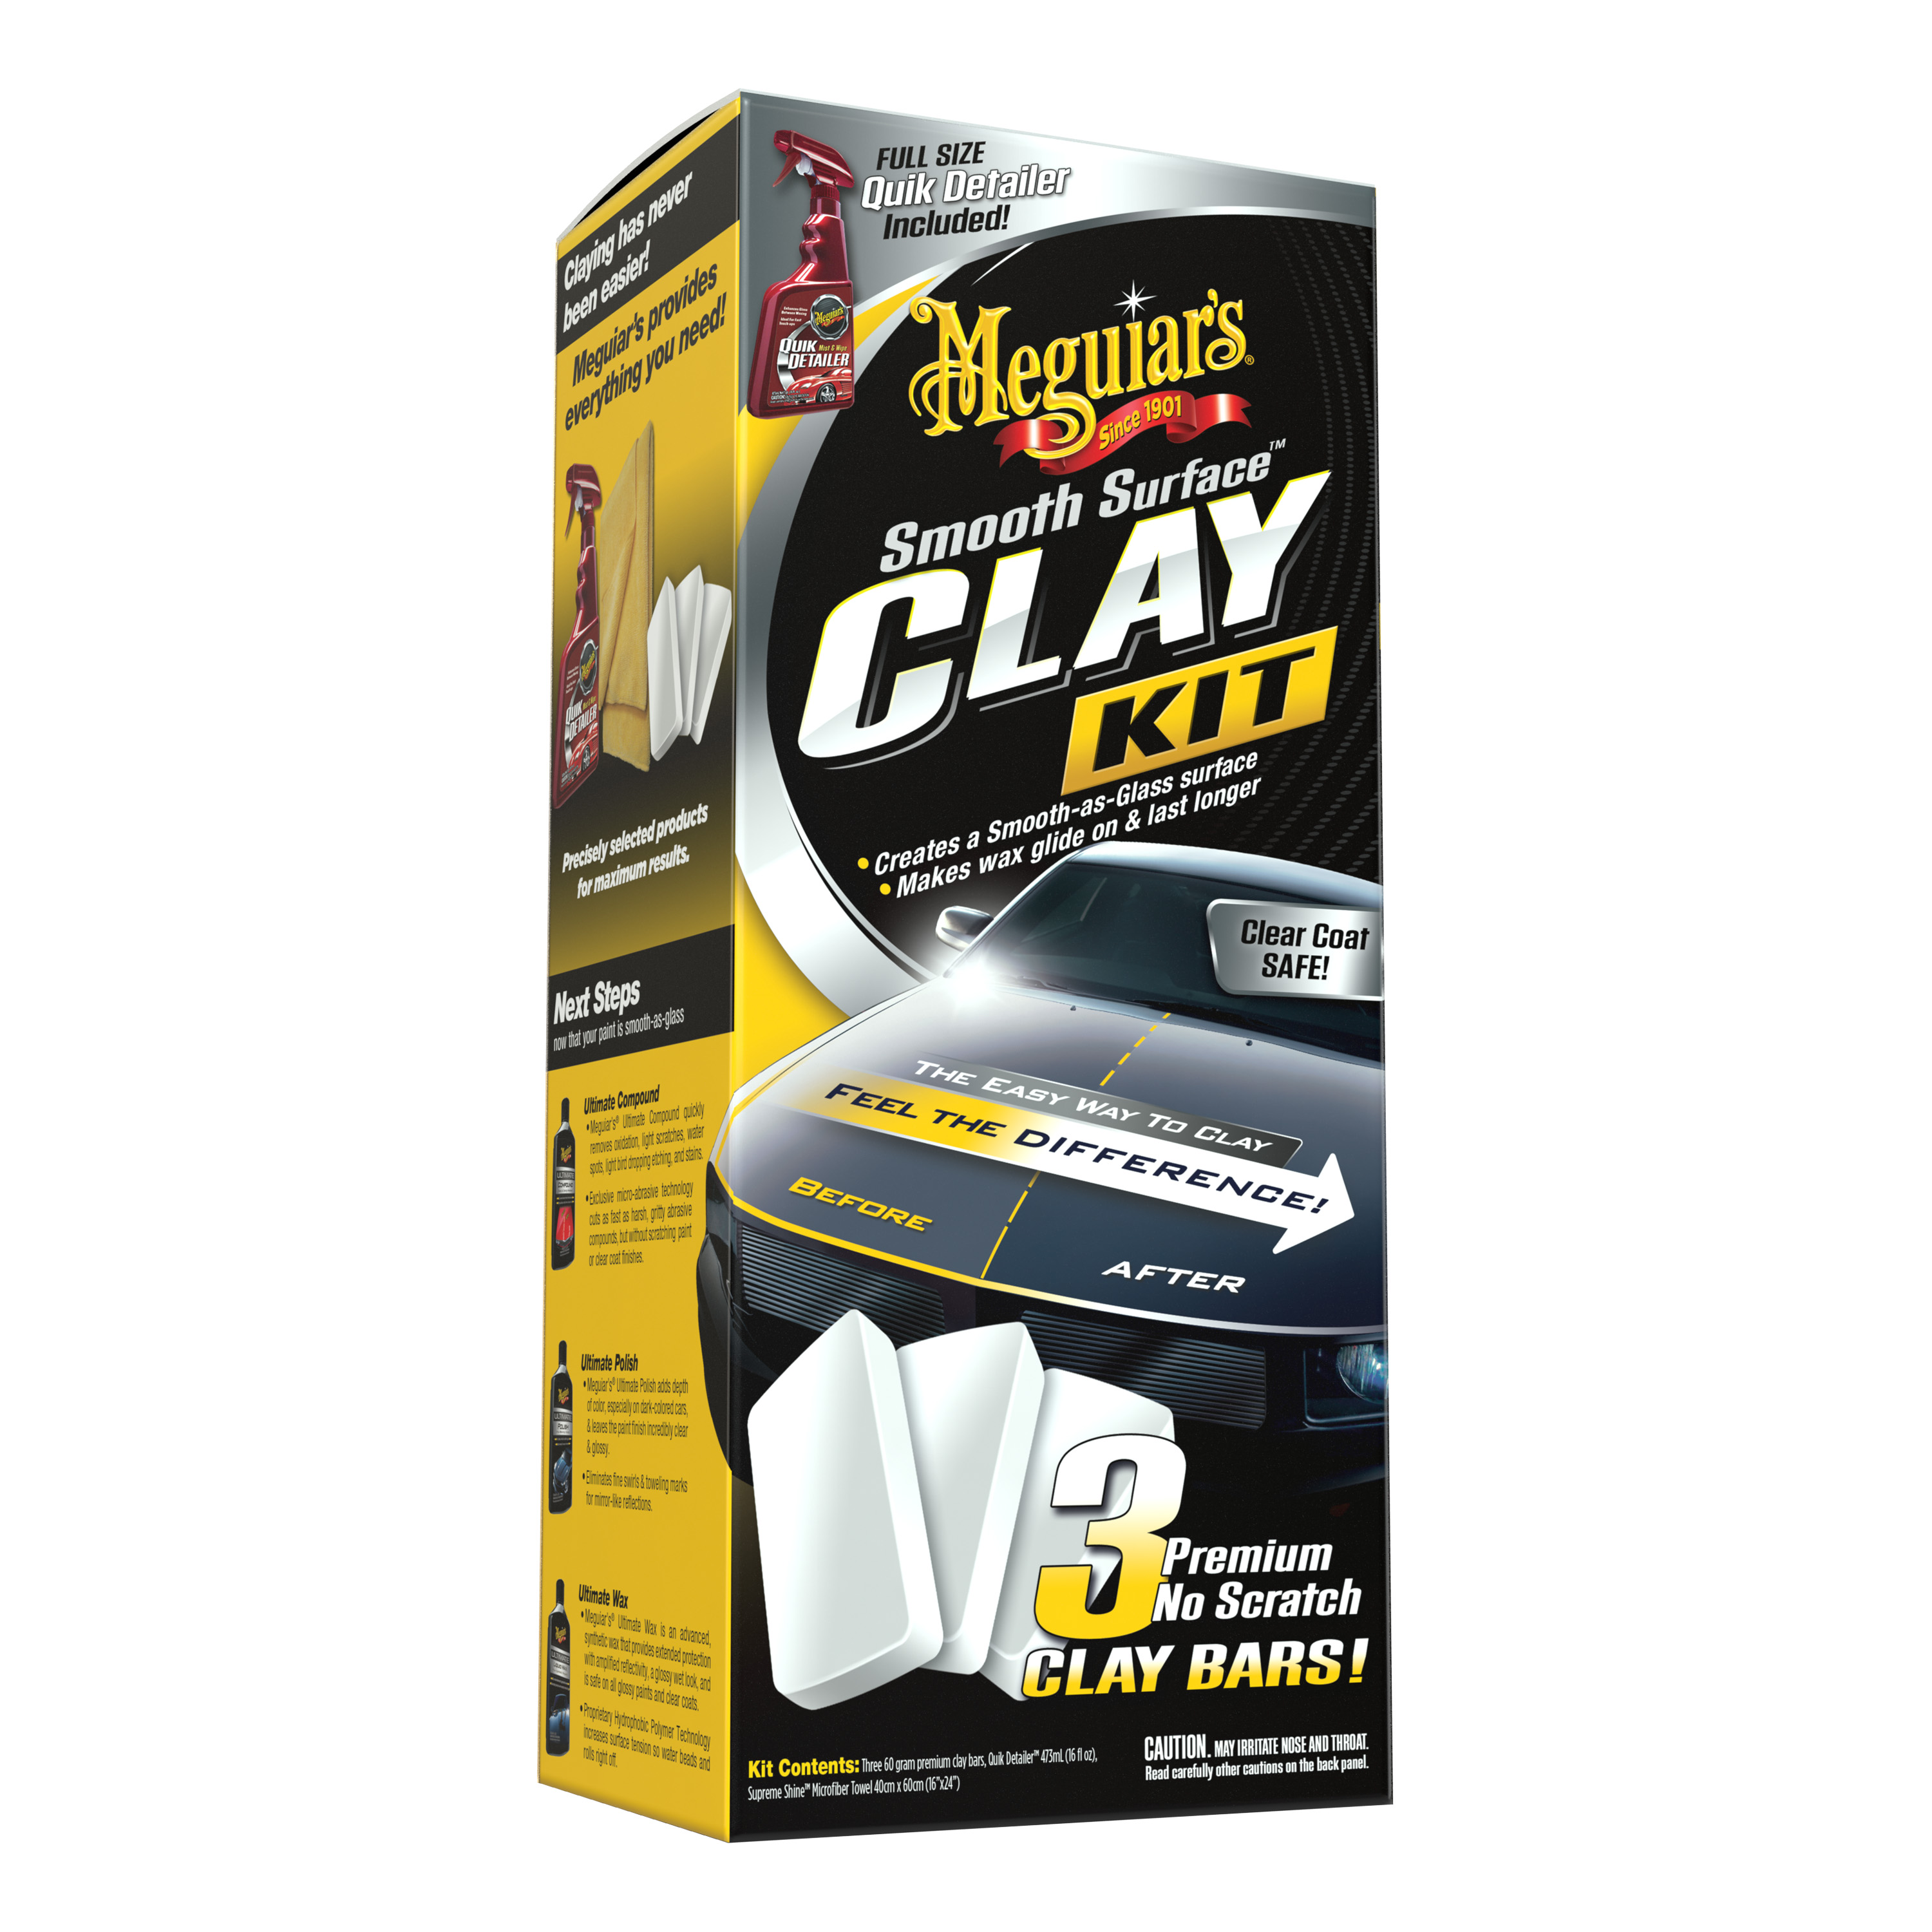 Meguiar's Smooth Surface Clay Kit - Safe and Easy Car Claying for a smooth as Glass Finish, G191700 - image 1 of 16